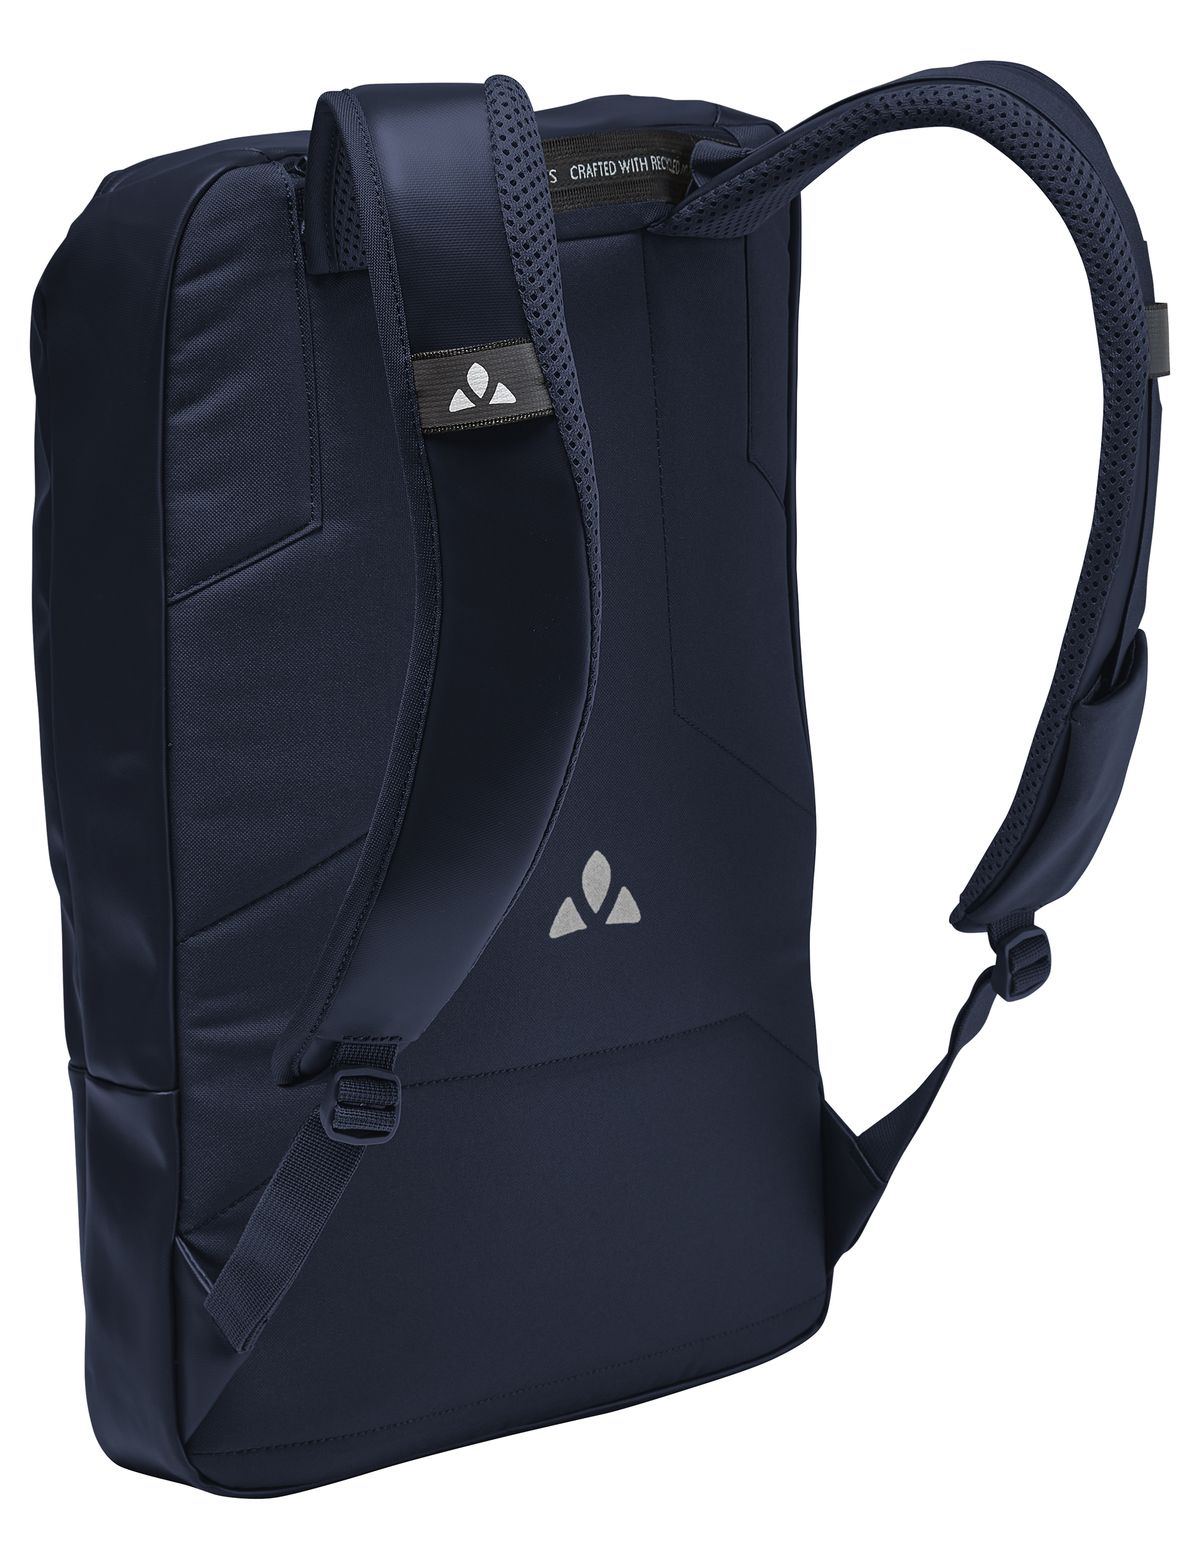 sac-a-dos-velo-impermeable-leger-confortable-renfort-dorsal-vaude-backpack-mineo